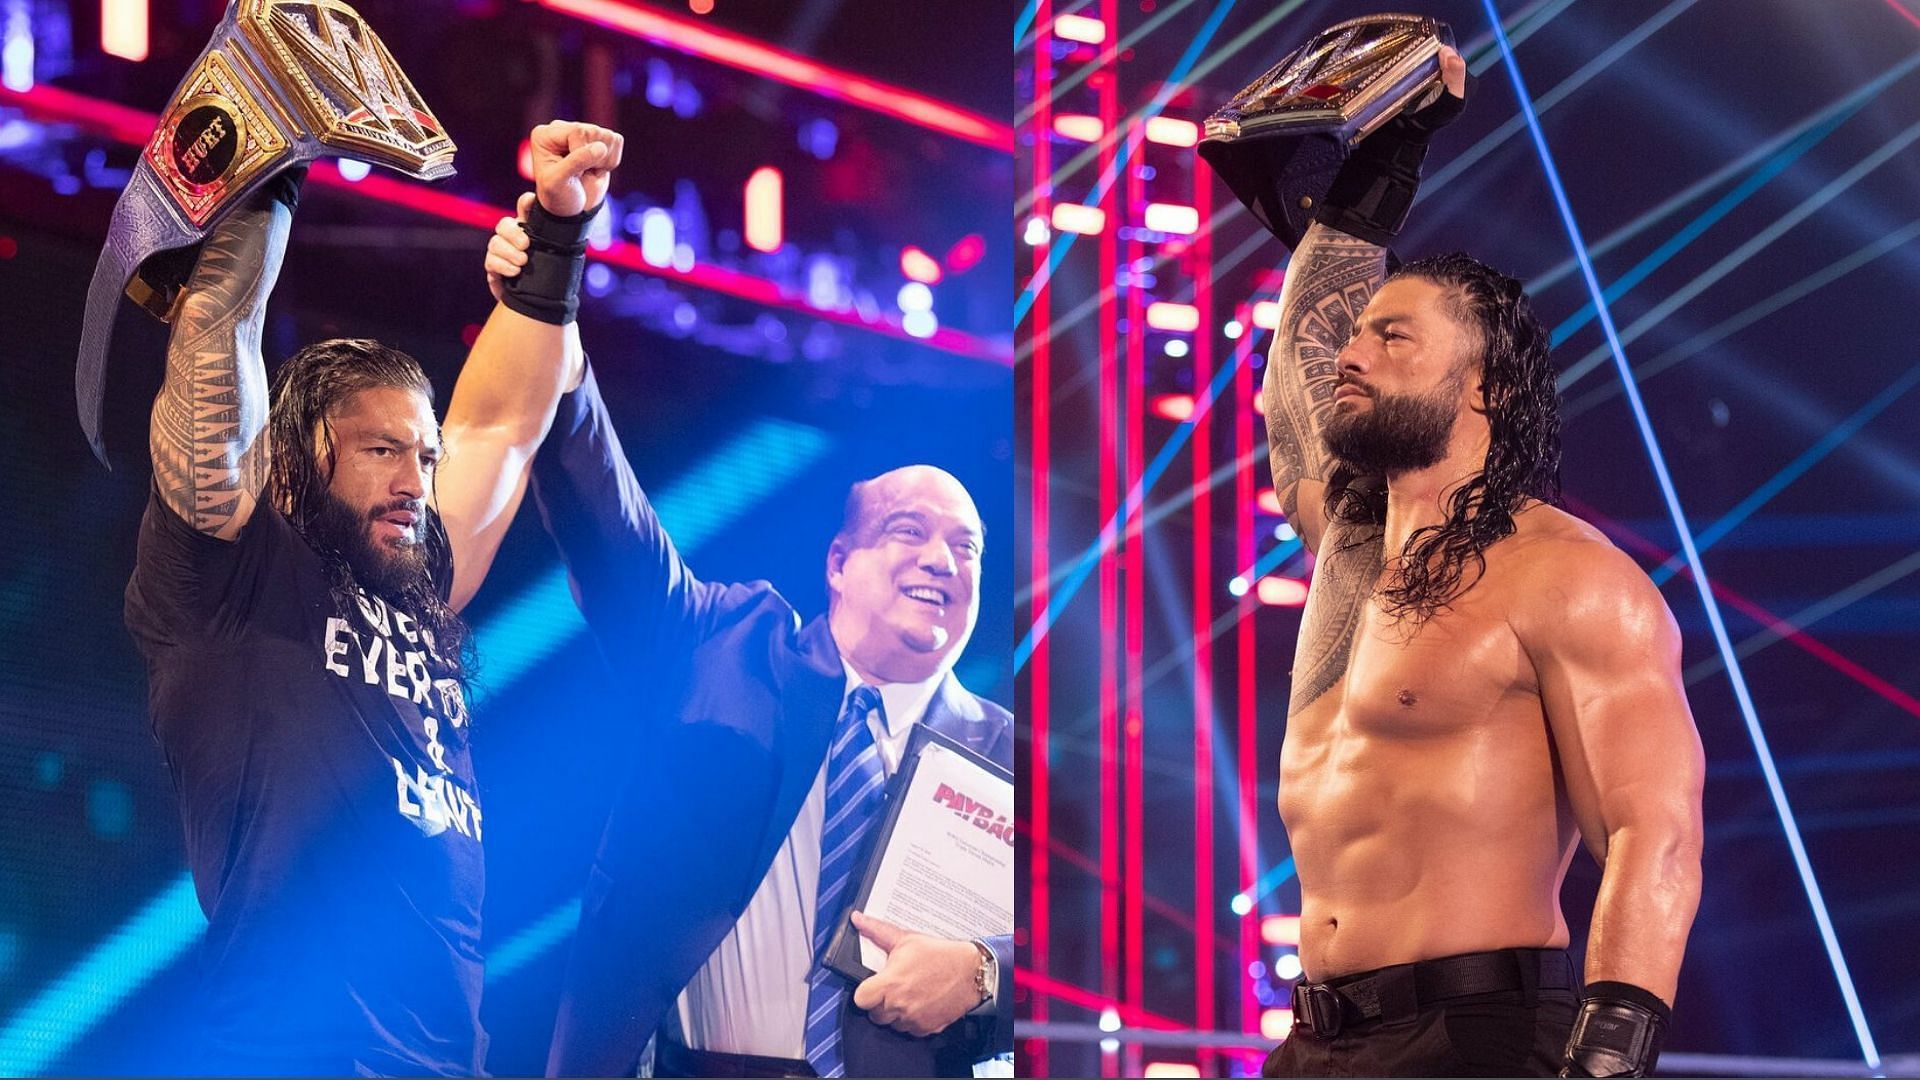 Could Roman Reigns win the Undisputed WWE Universal Title again?